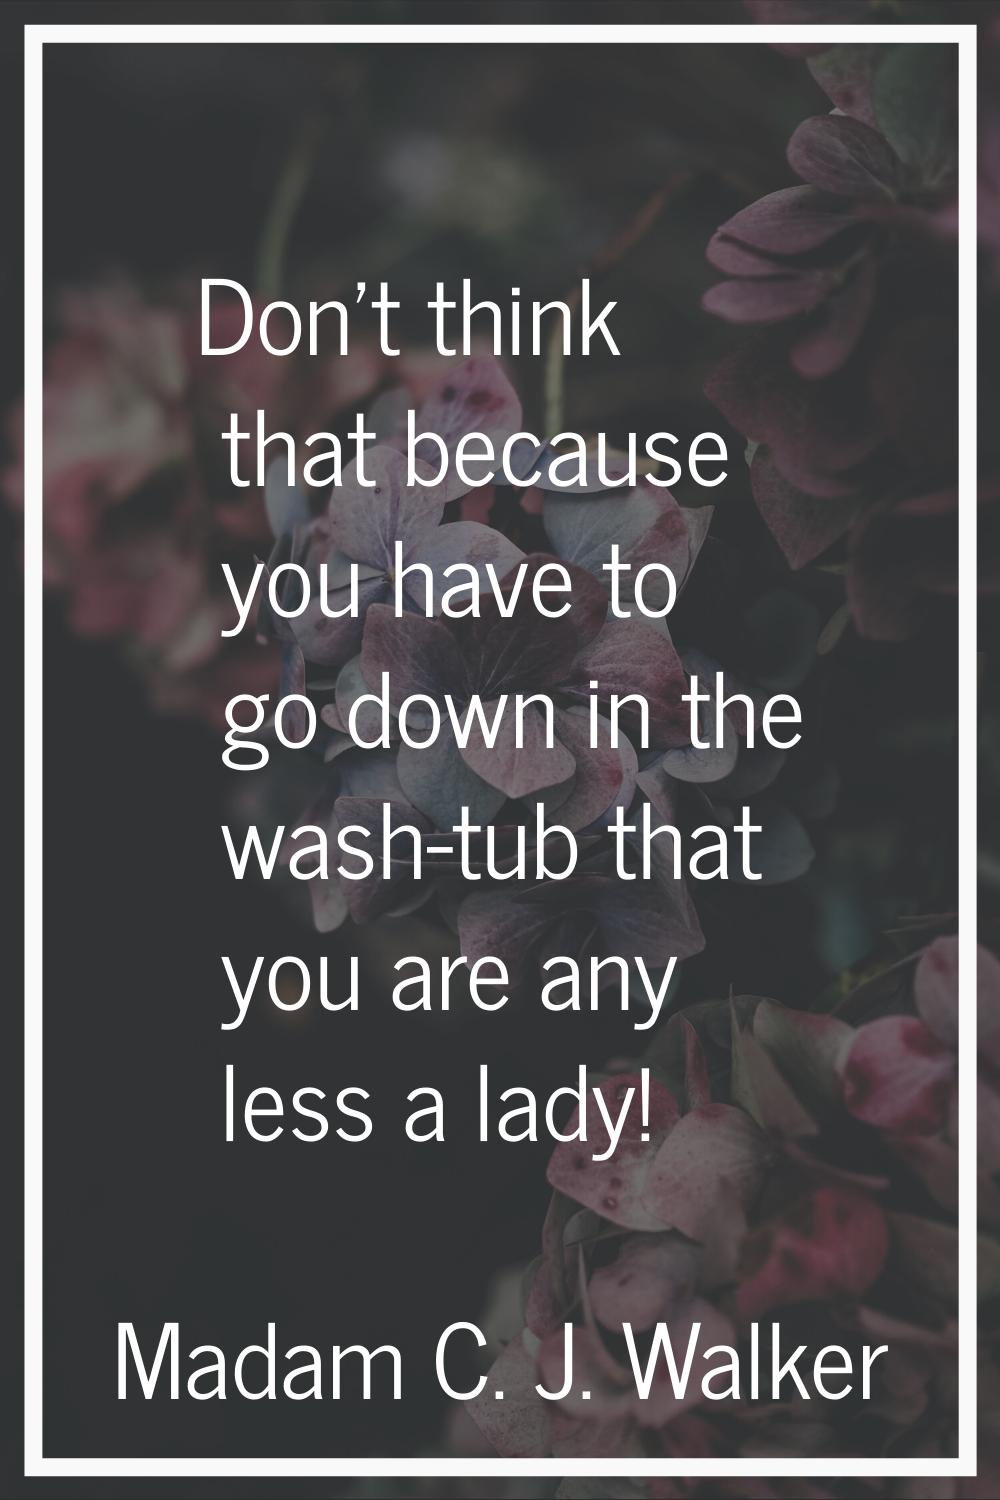 Don't think that because you have to go down in the wash-tub that you are any less a lady!